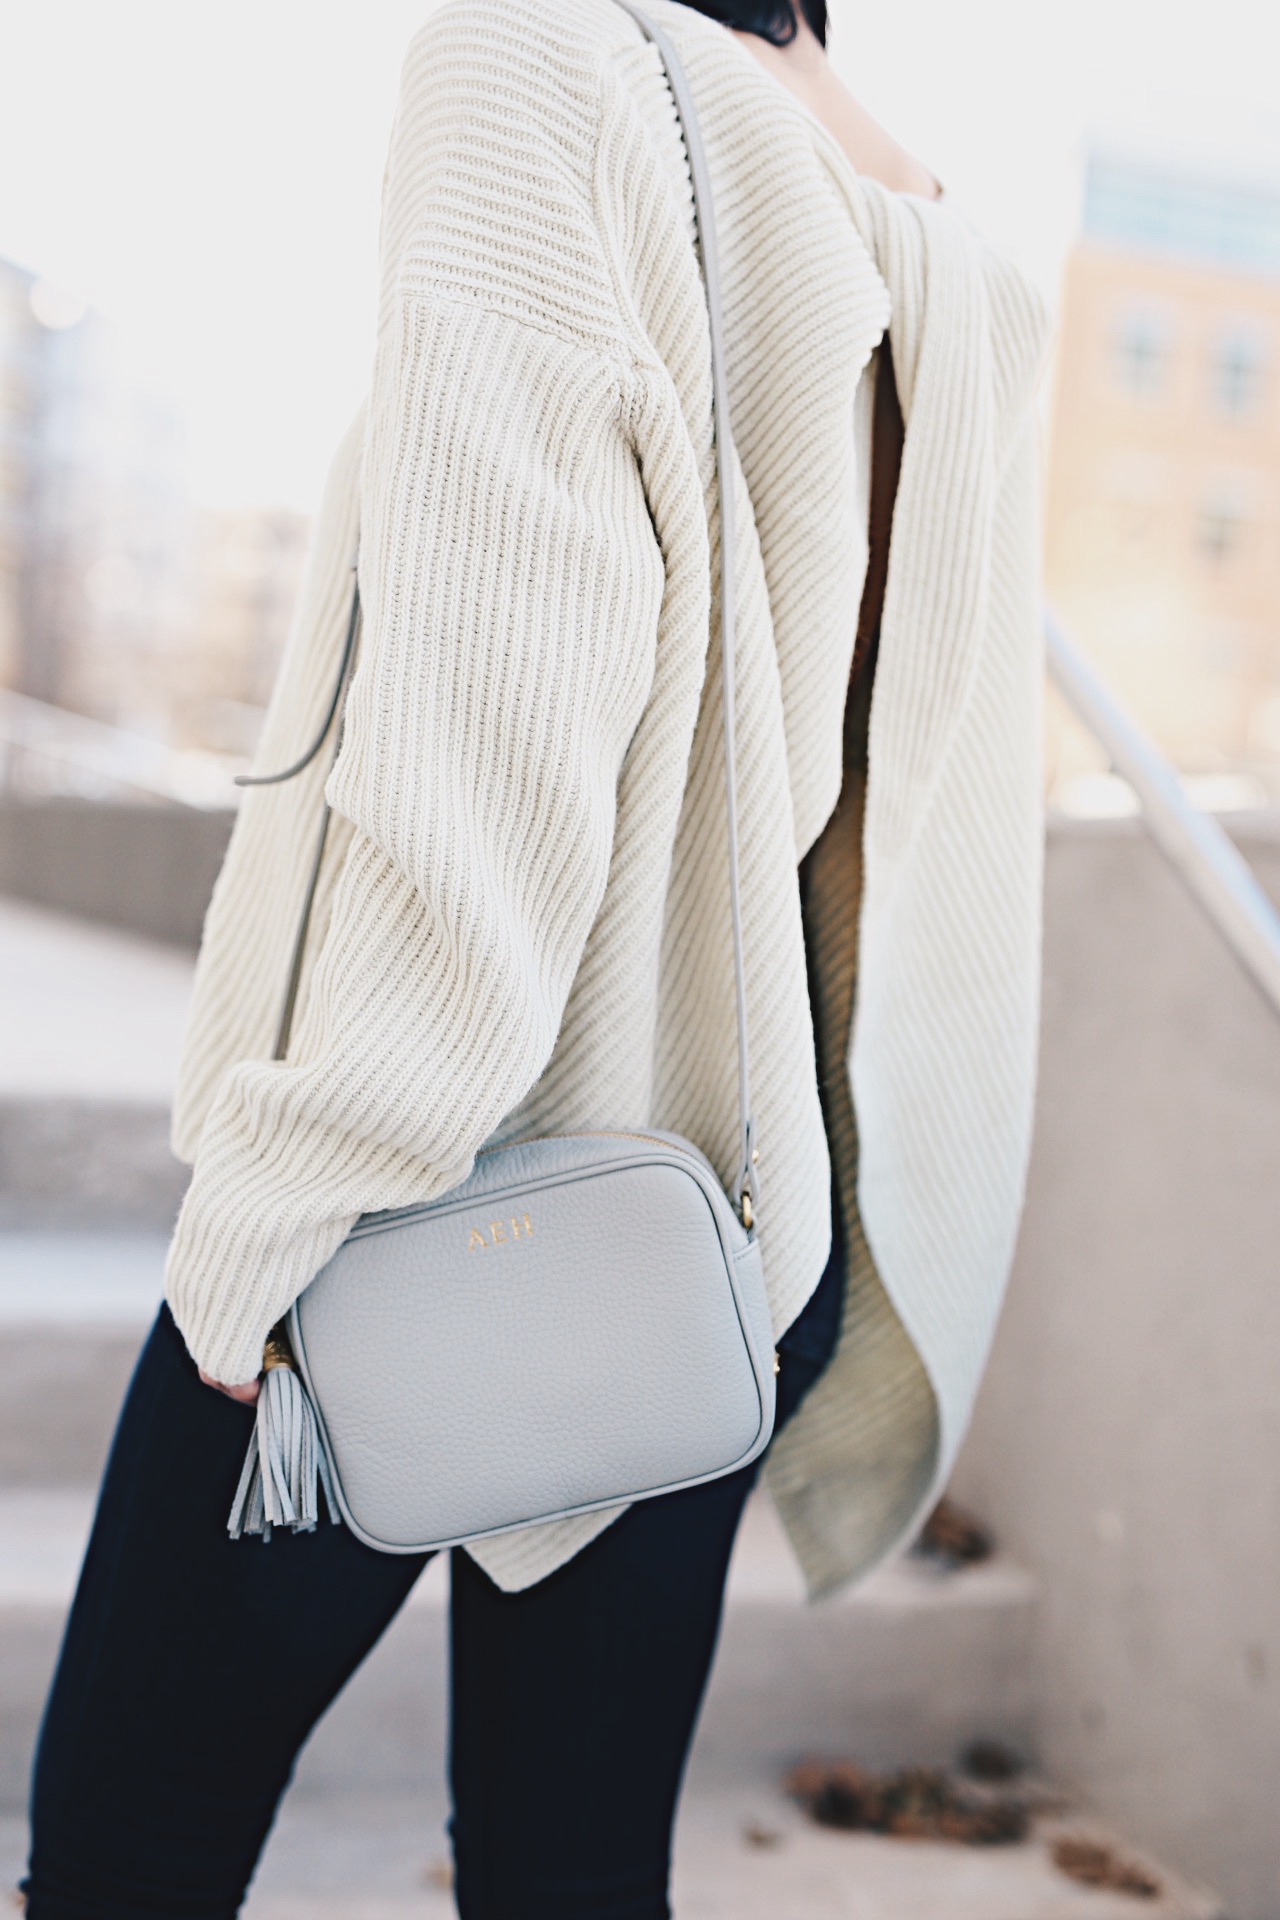 Ashley of DTKAustin is wearing a Chicwish Ivory open back sweater, a Gigi New York cross body bag, Steve Madden heels and Articles of Society Denim in Austin.